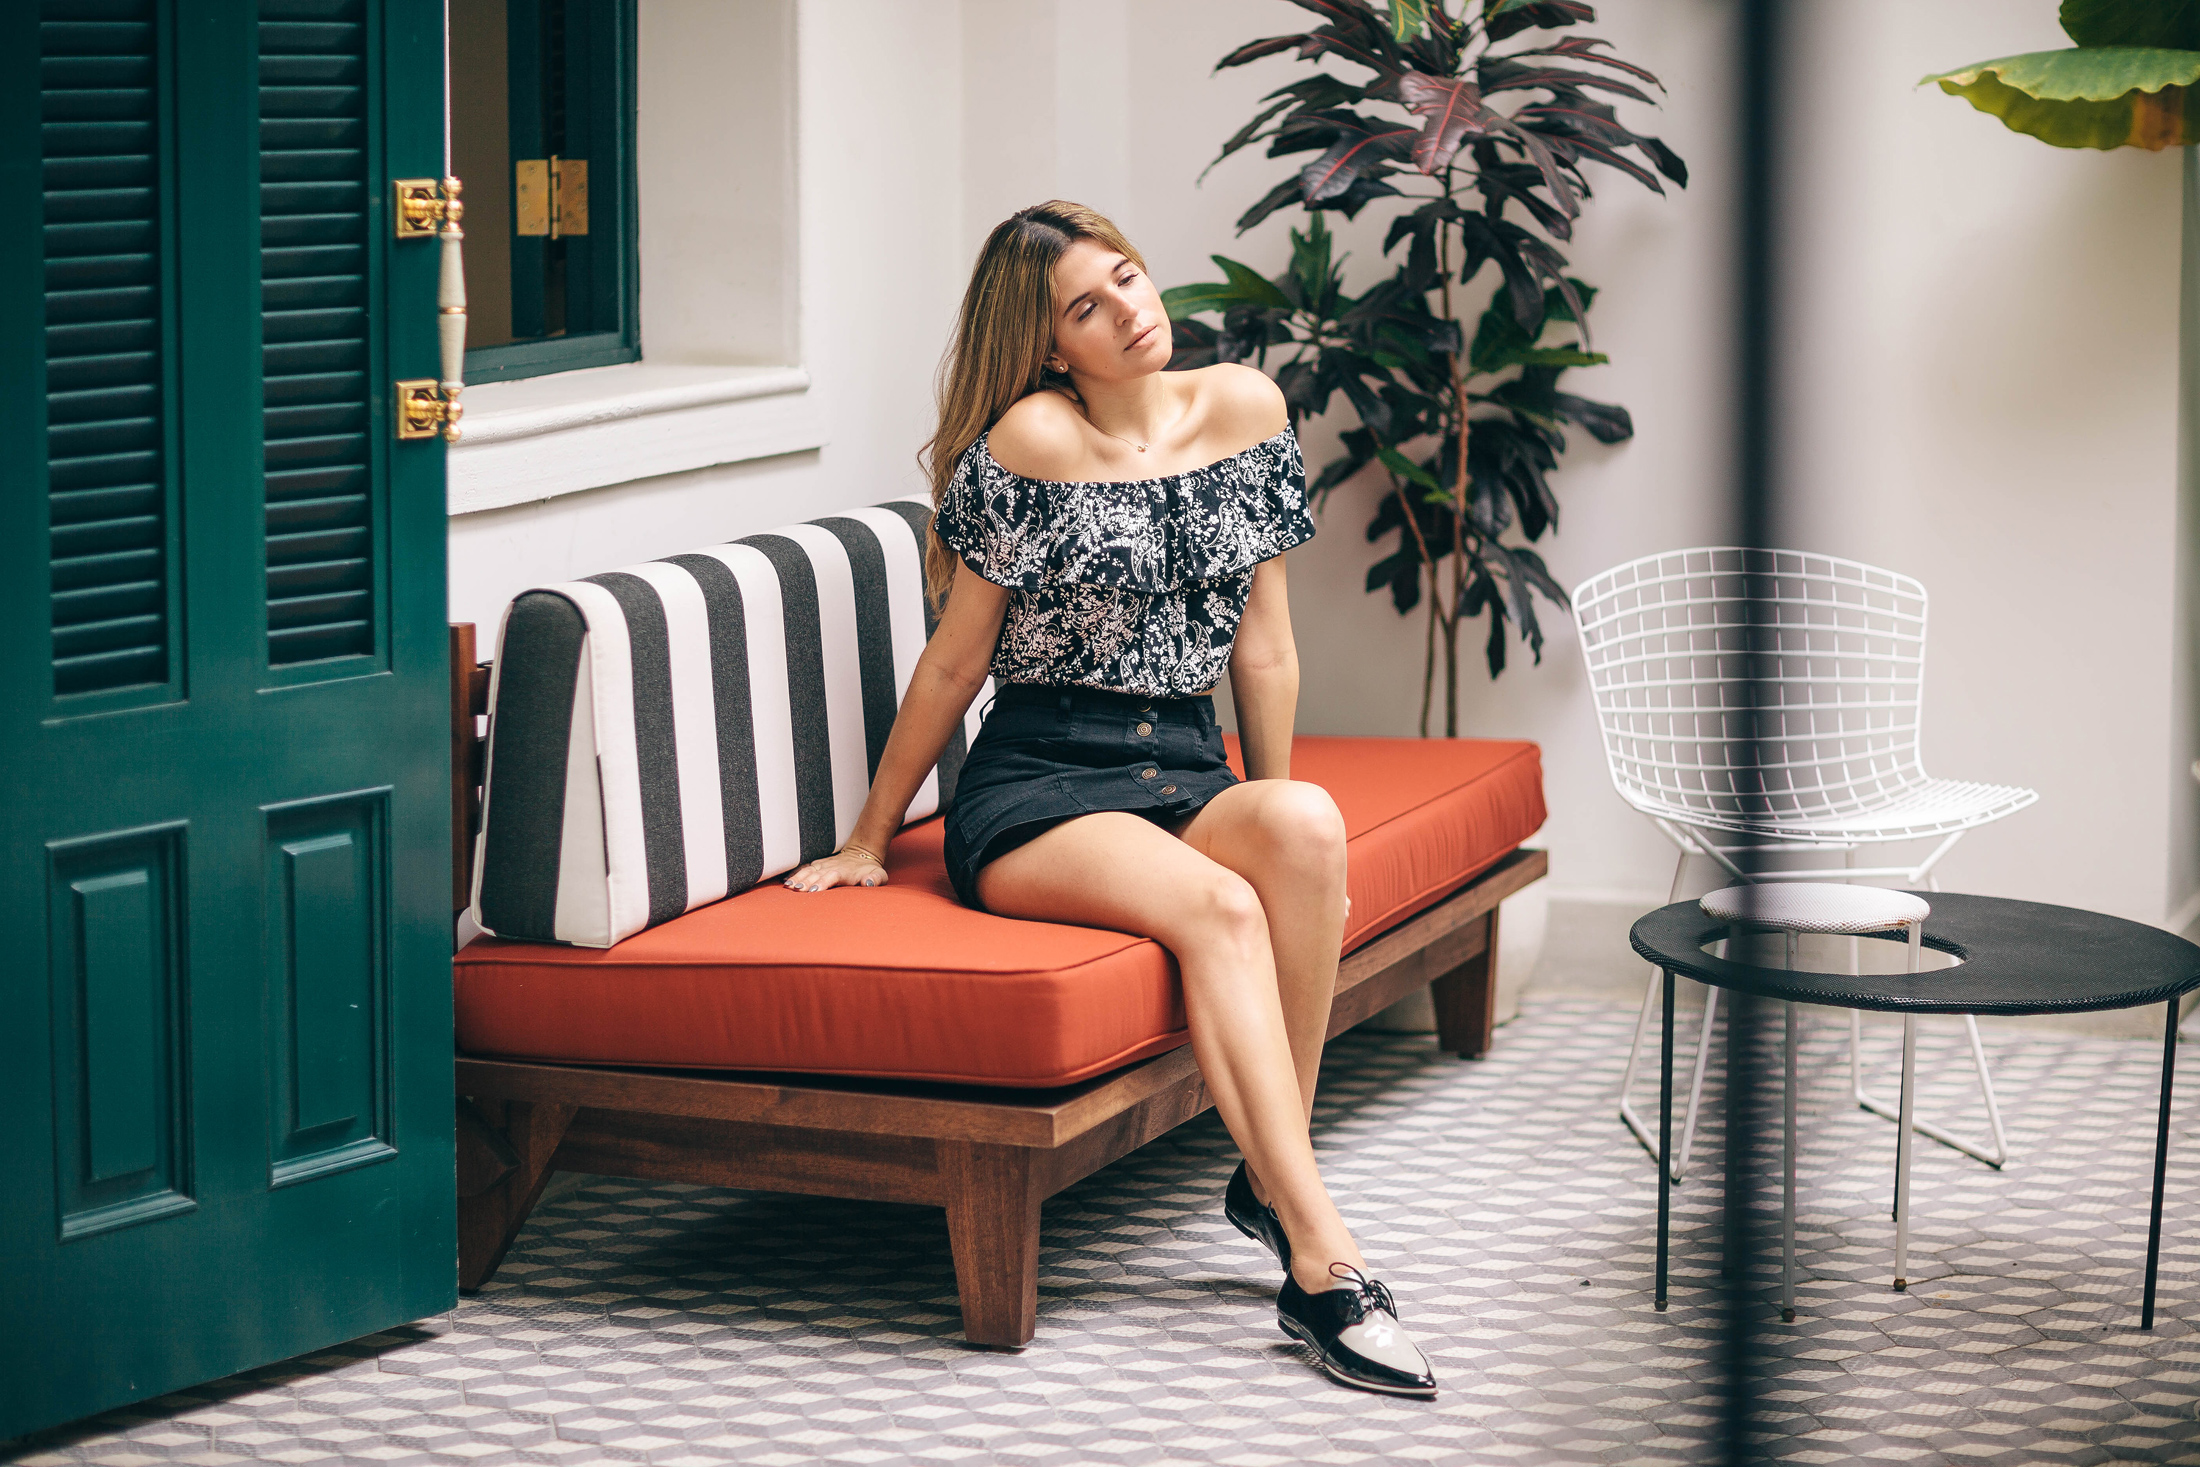 Maristella lounging at the American Trade Hotel wearing Stradivarius skirt and top with Zara pointy flats